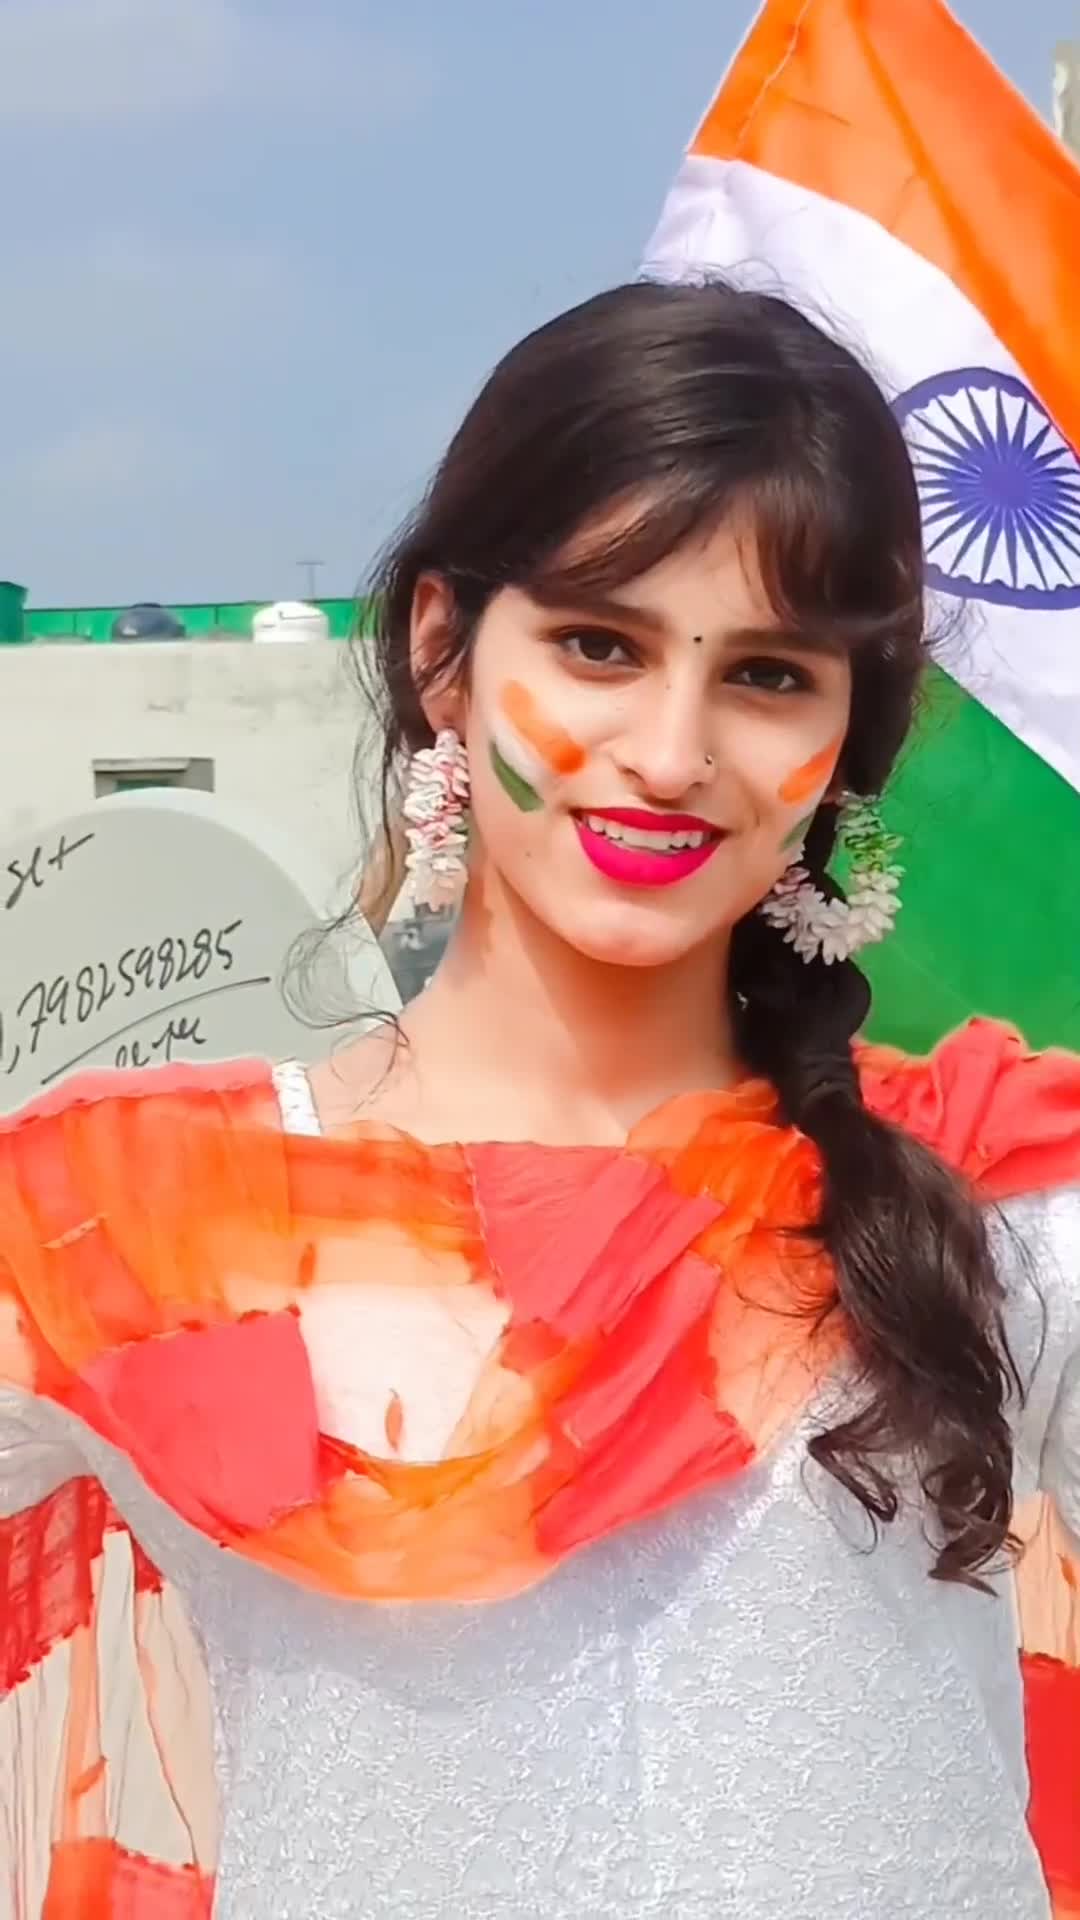 Show your patriotism by uploading your videos using the hashtag #HappyRepublicDay.🇮🇳
#MojPeHiMojHai